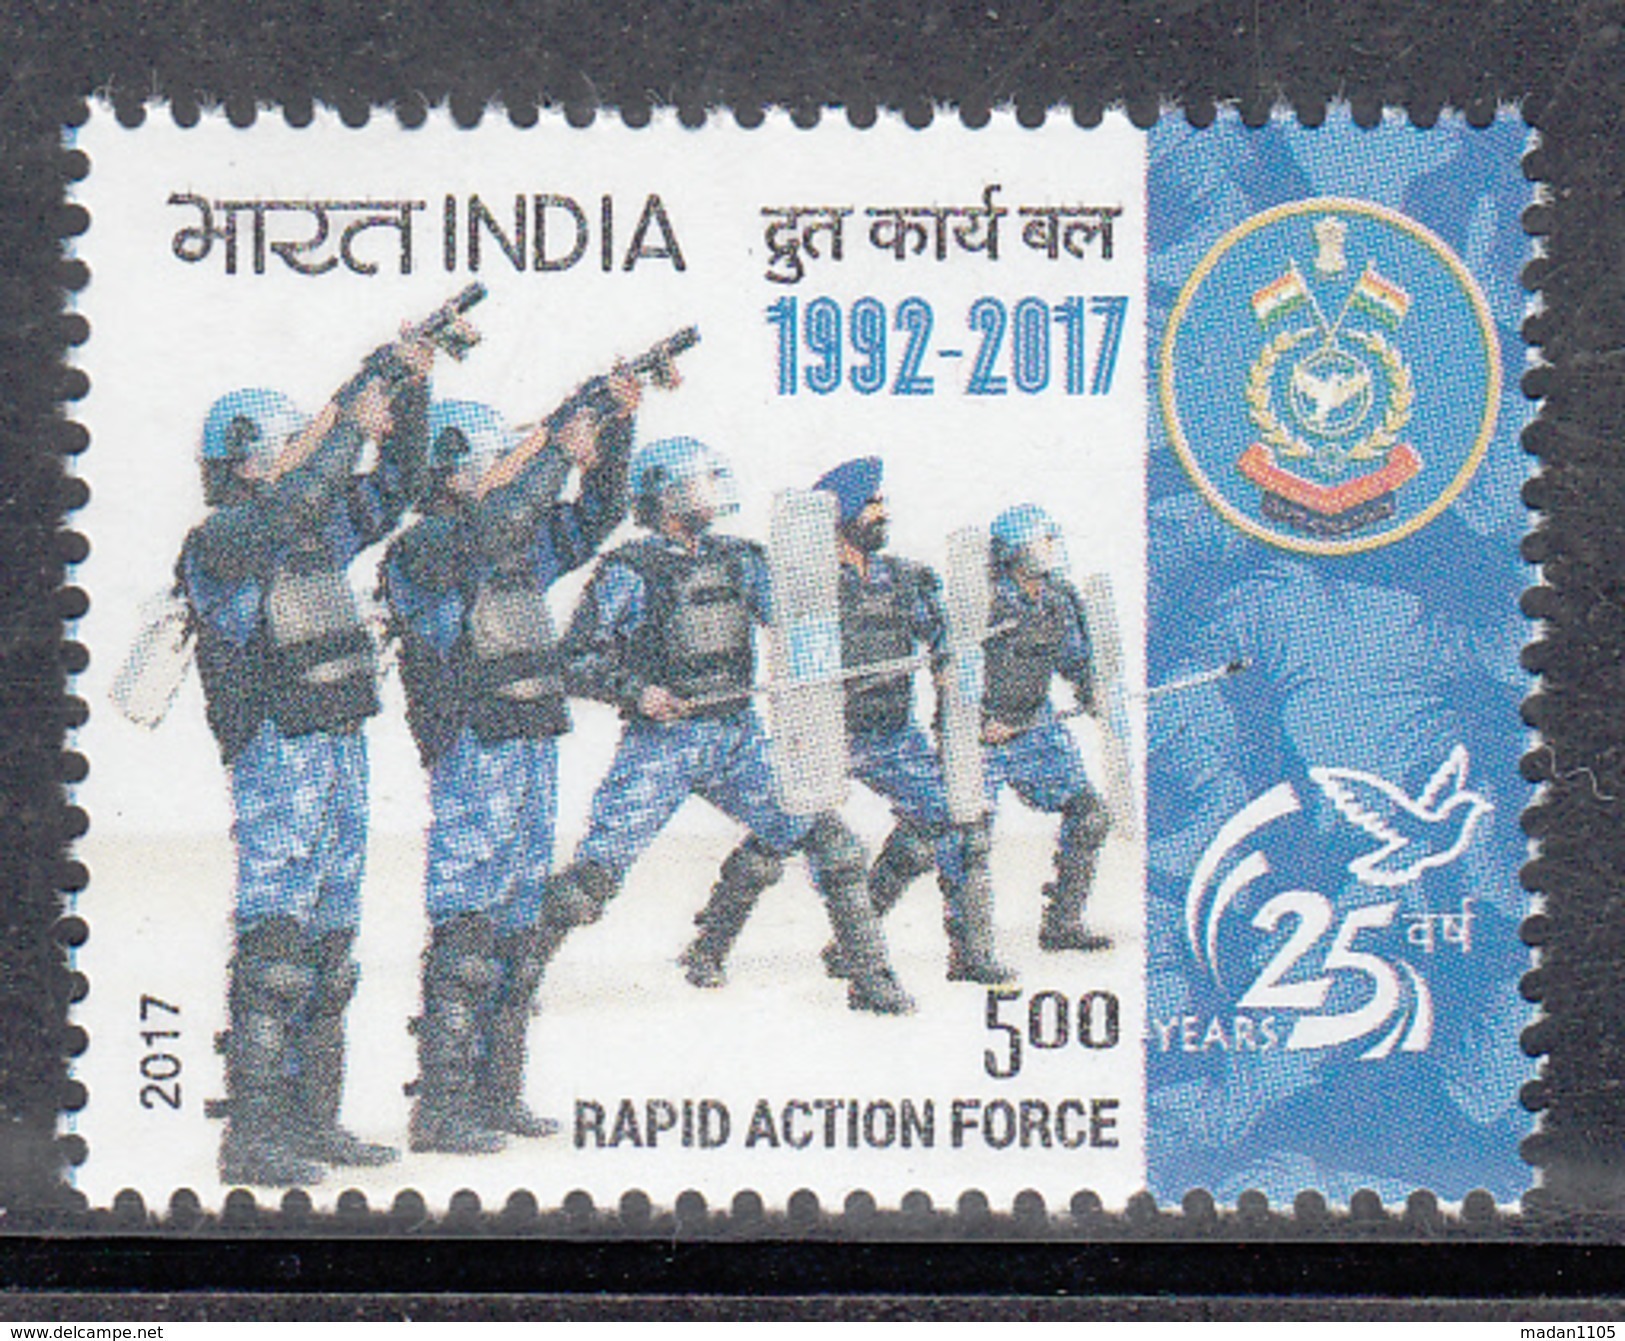 INDIA, 2017, Rapid Action Force, Mititaria, Armed Force, 1v, MNH (**) - Ungebraucht